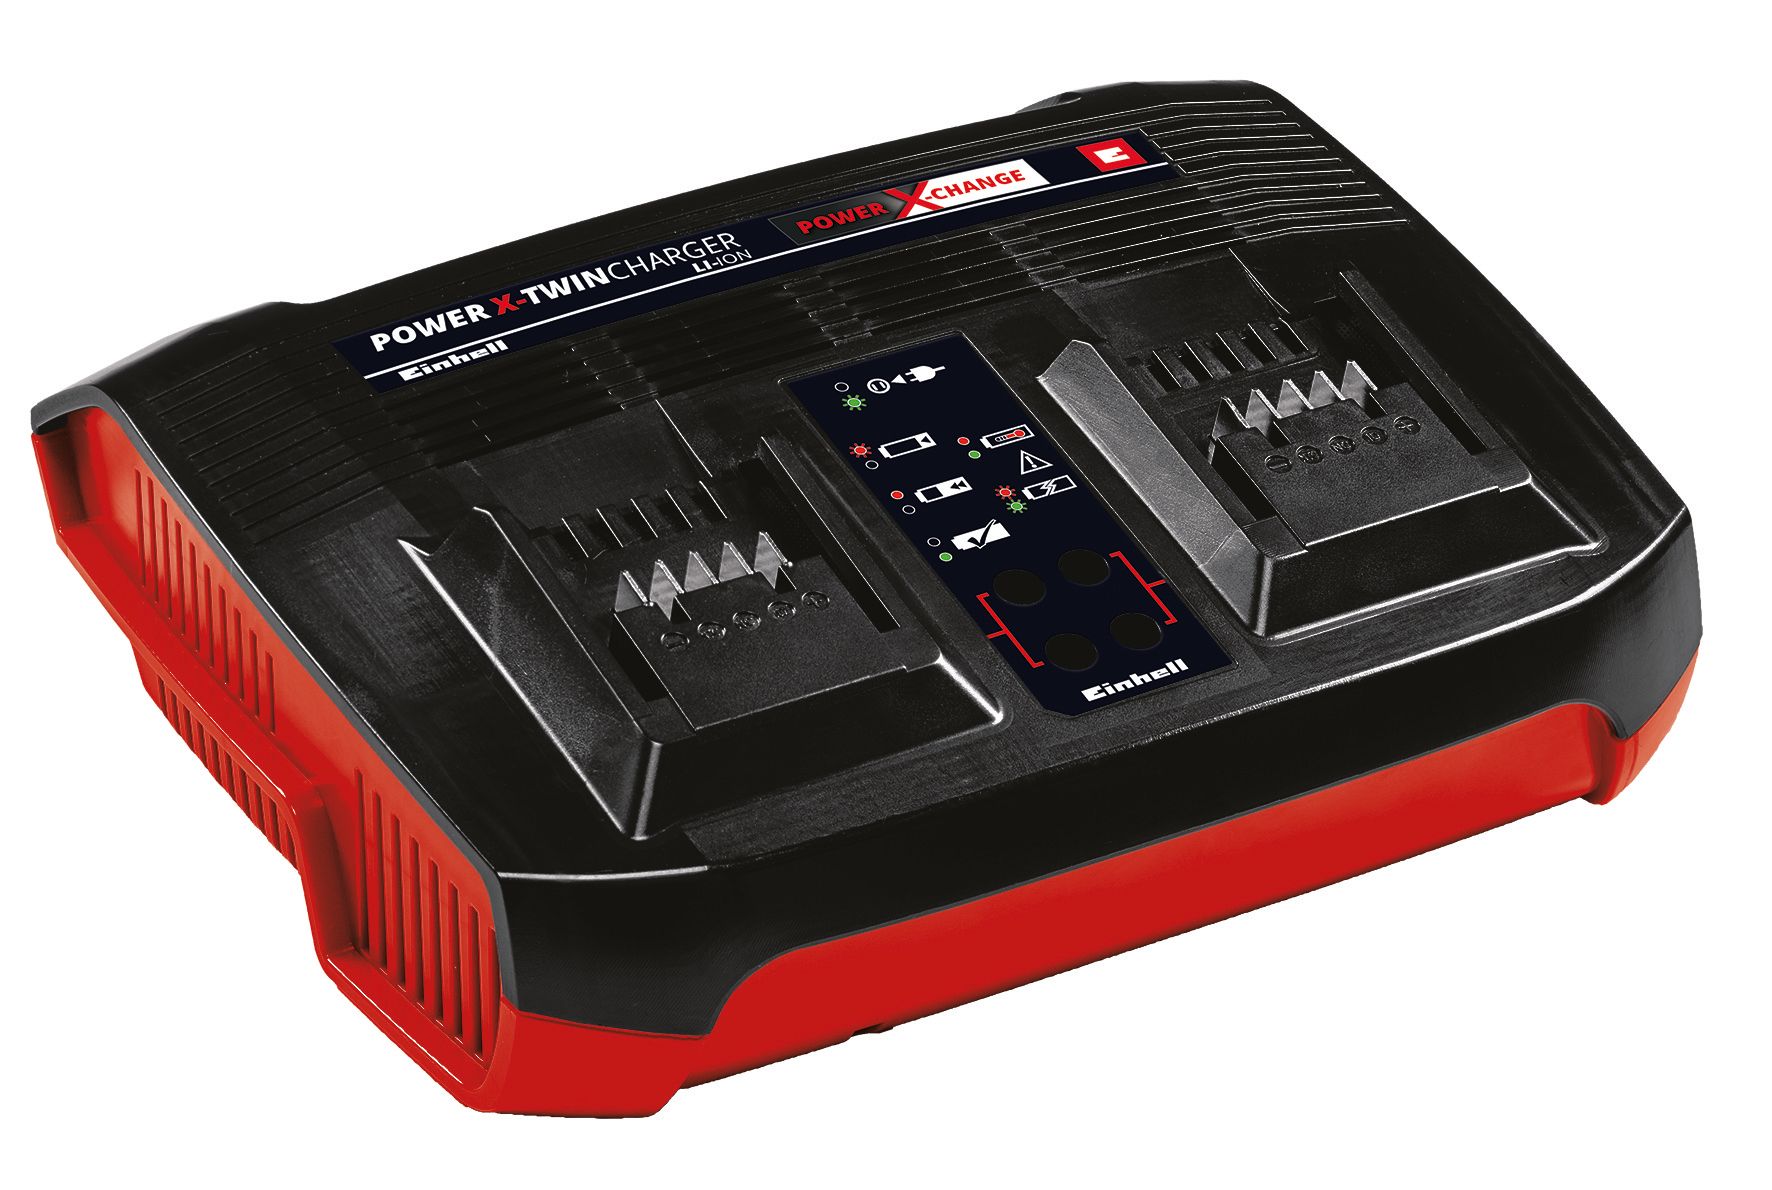 Image of Einhell Power X-Change Twin 18V Battery Charger